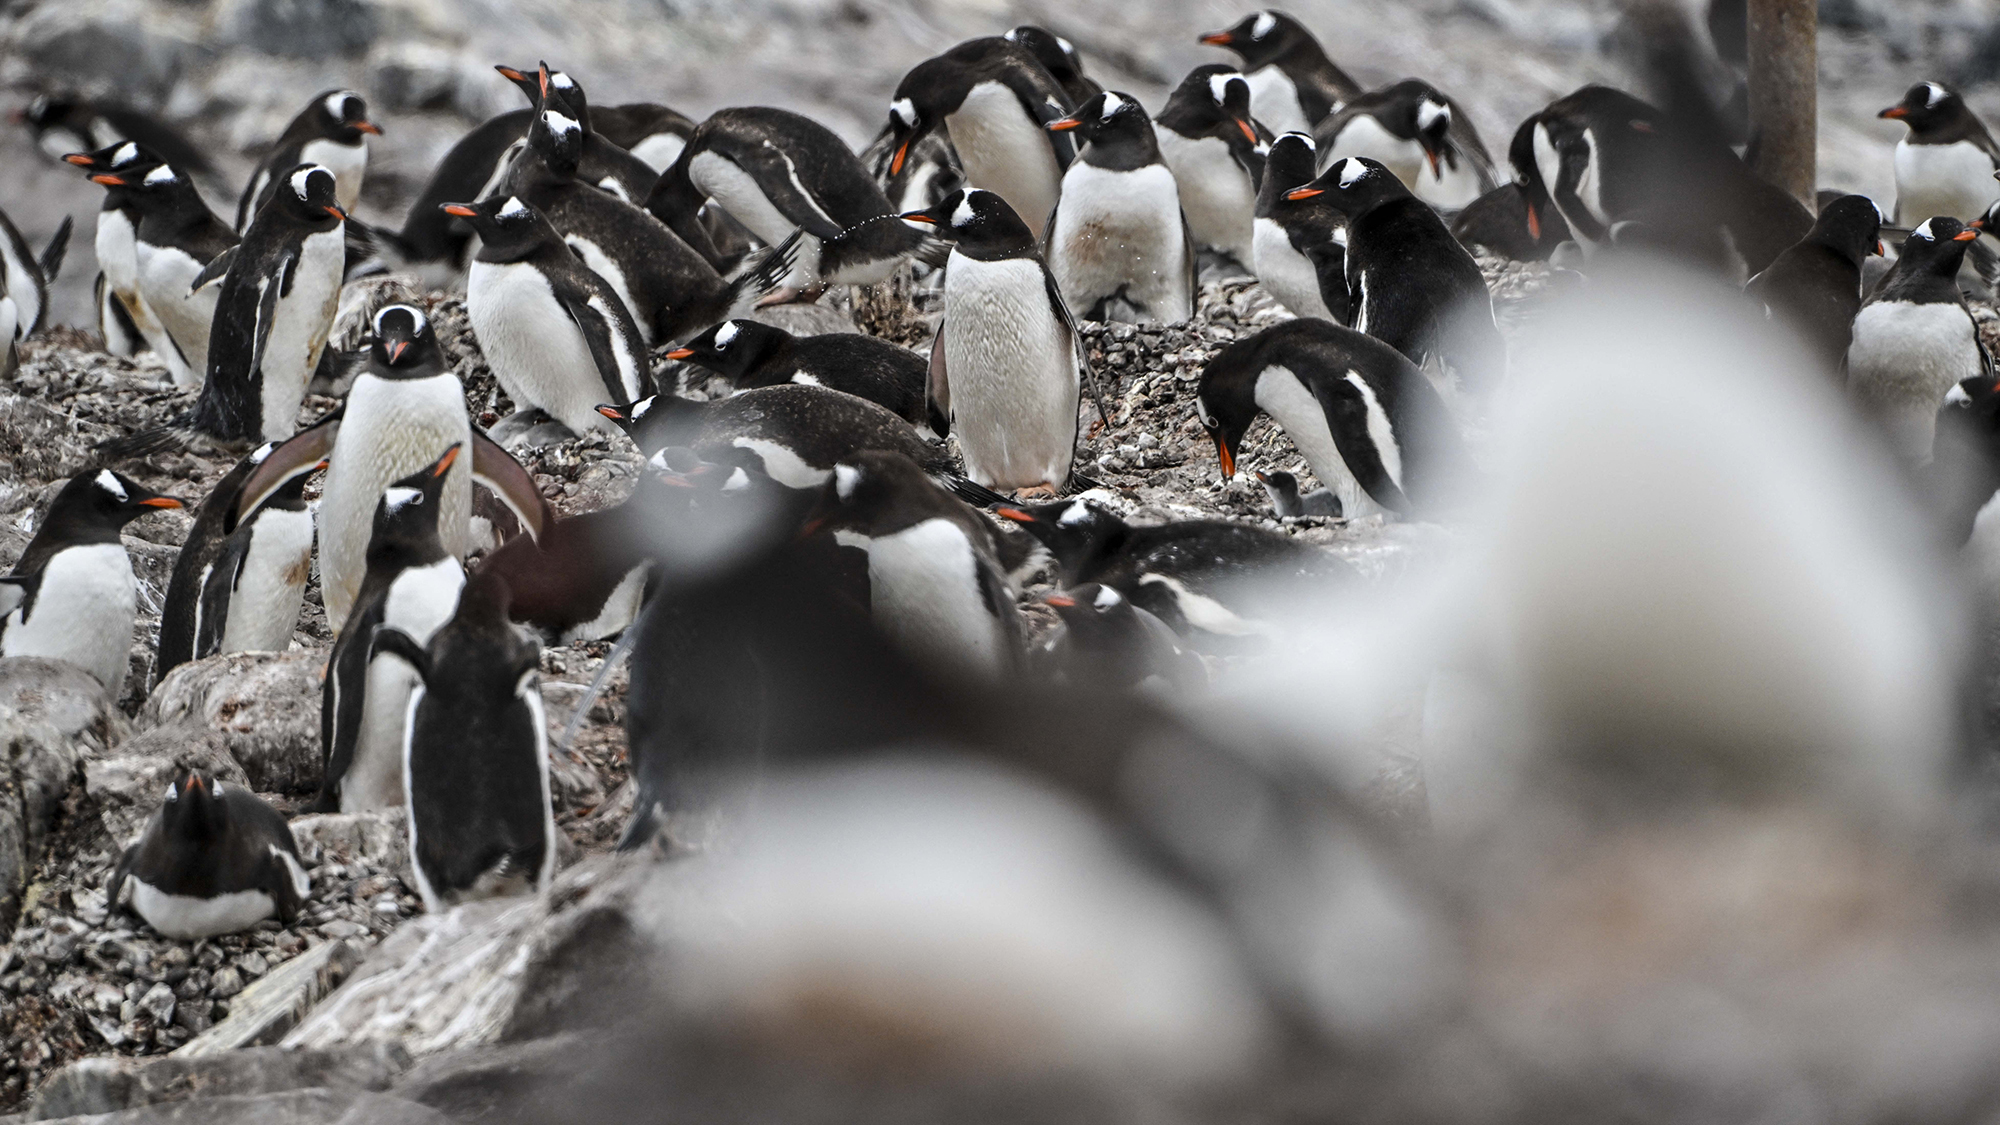 H5N1 flu has been confirmed in Gentoo penguins for the first time. Over 20 Gentoo chicks have been reported dead from the virus or are showing symptoms of this highly contagious strain of bird flu.